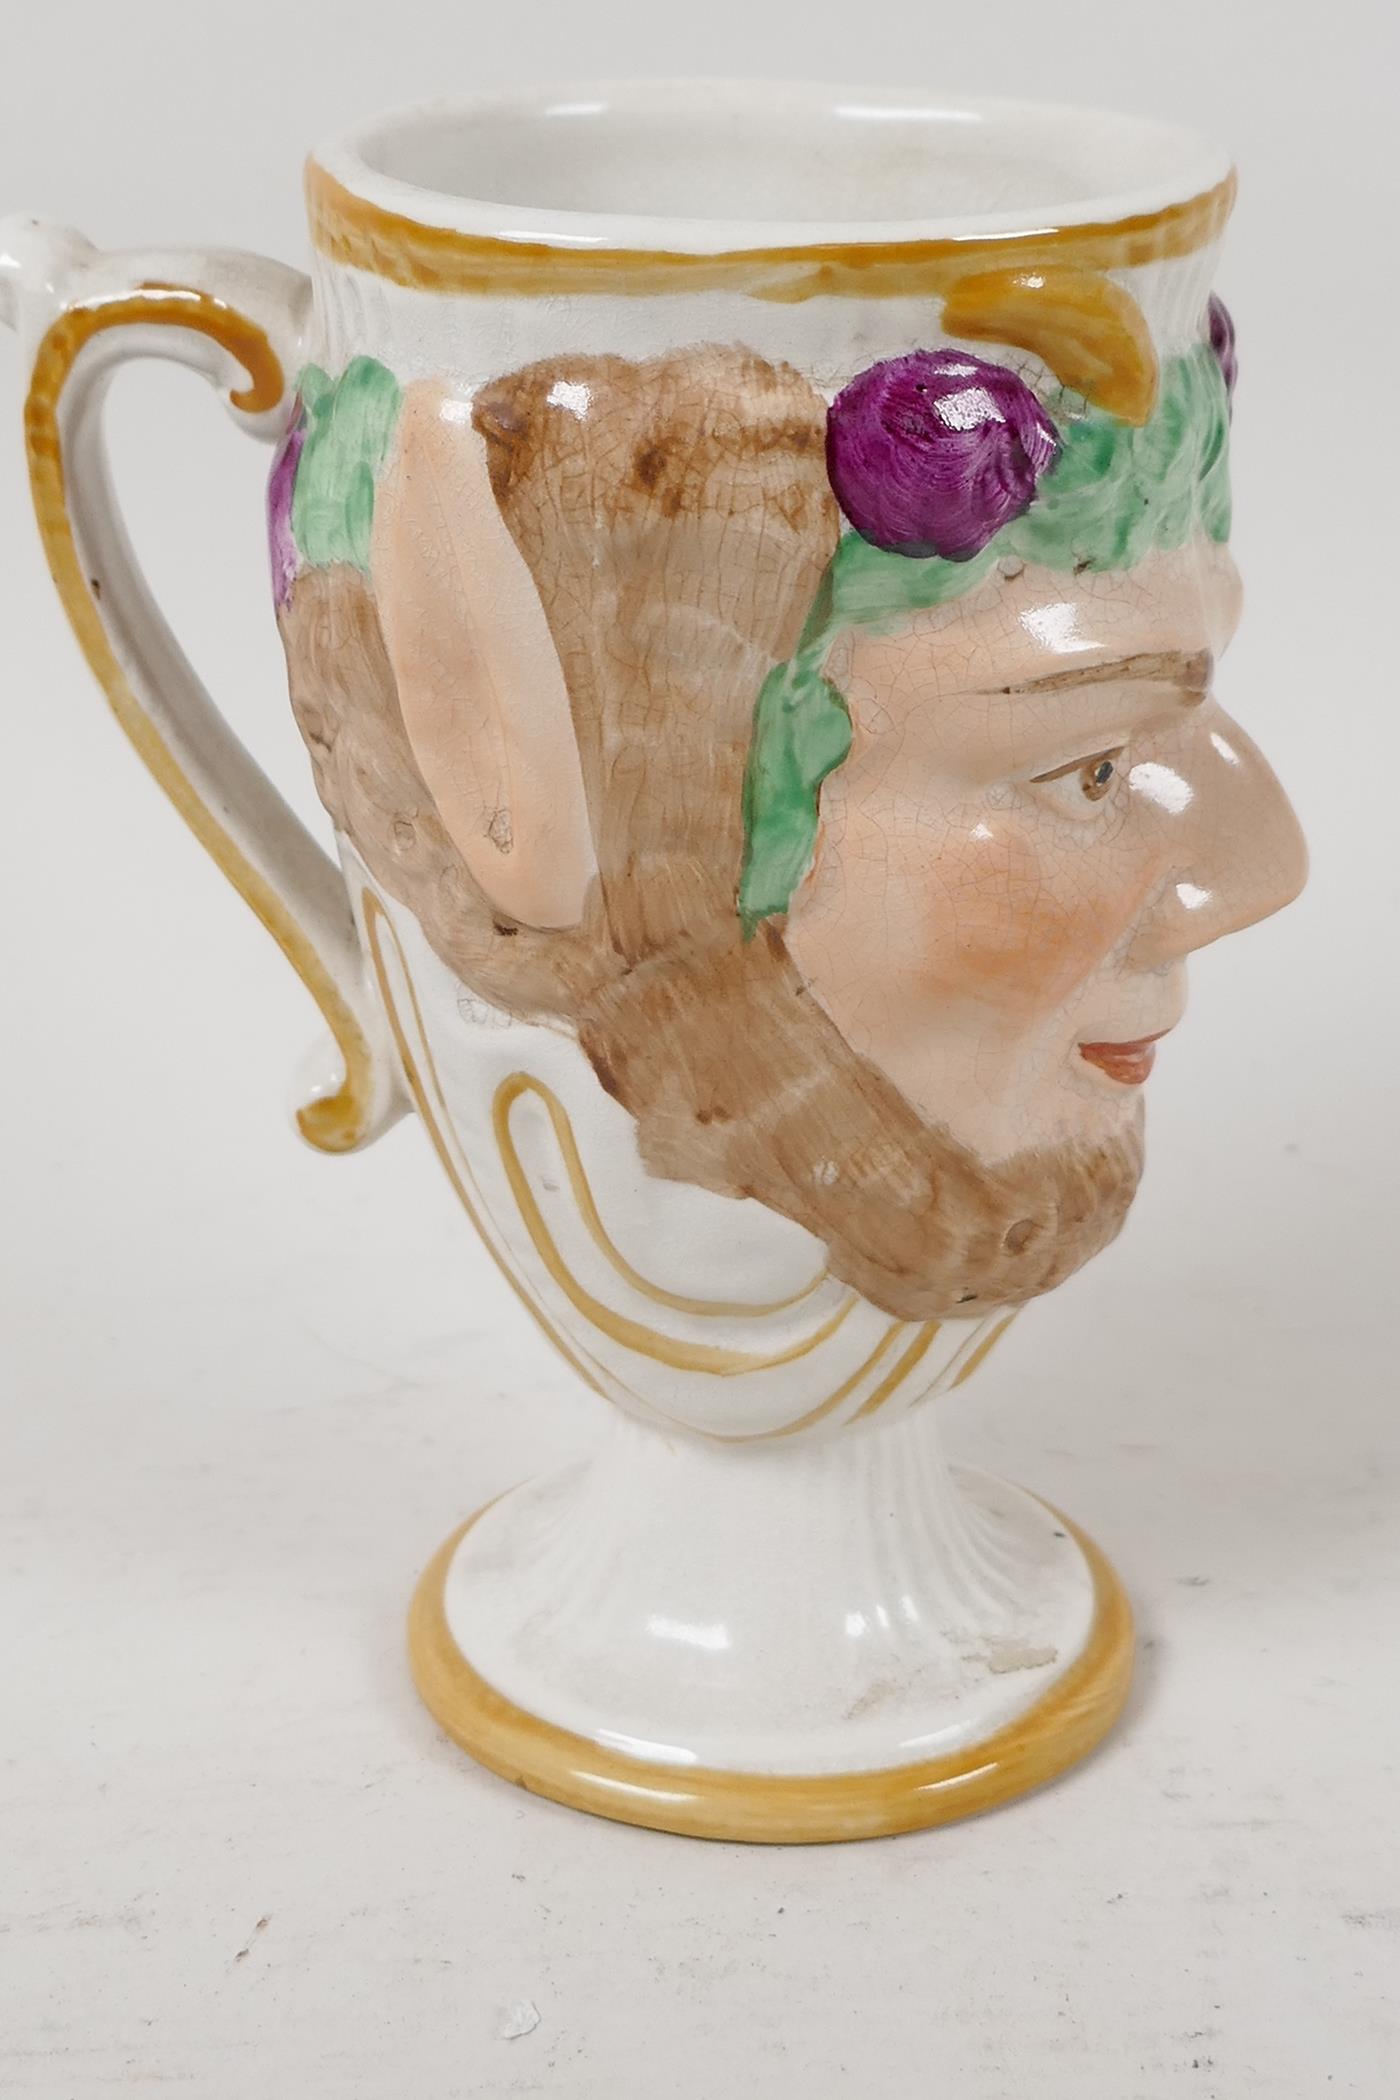 A Fayence Bacchus face mug with surprise frog inside, 5" high